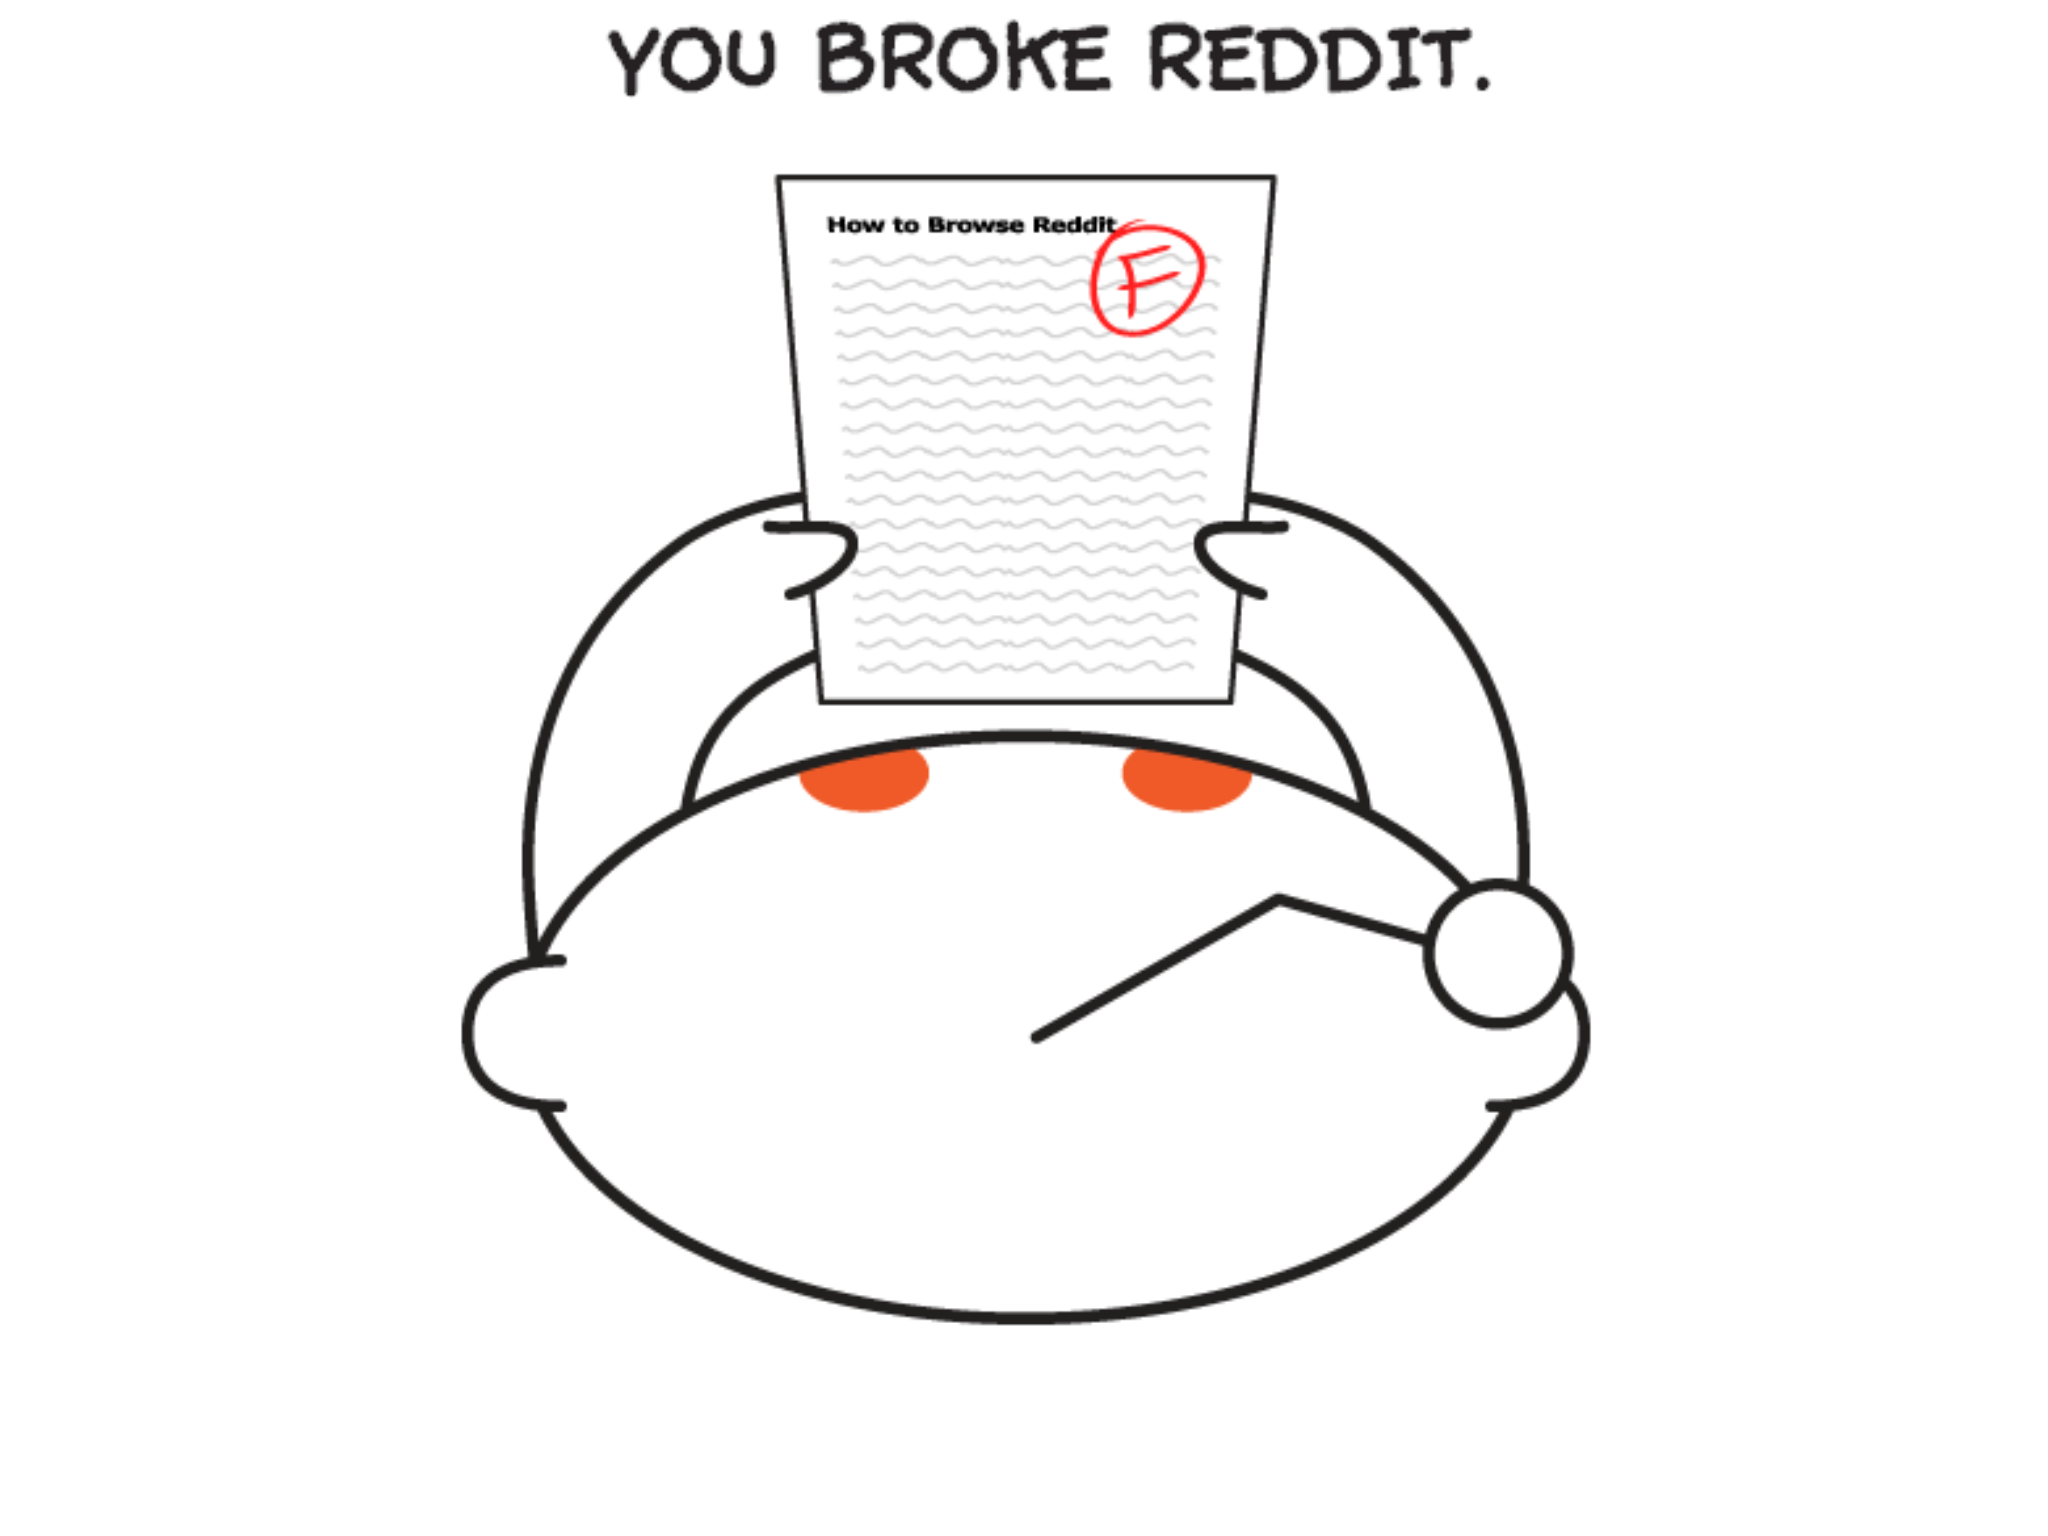 Well, maybe not you in particular, but somebody sure did! - r/iPhone is the first victim of this latest strike against Reddit